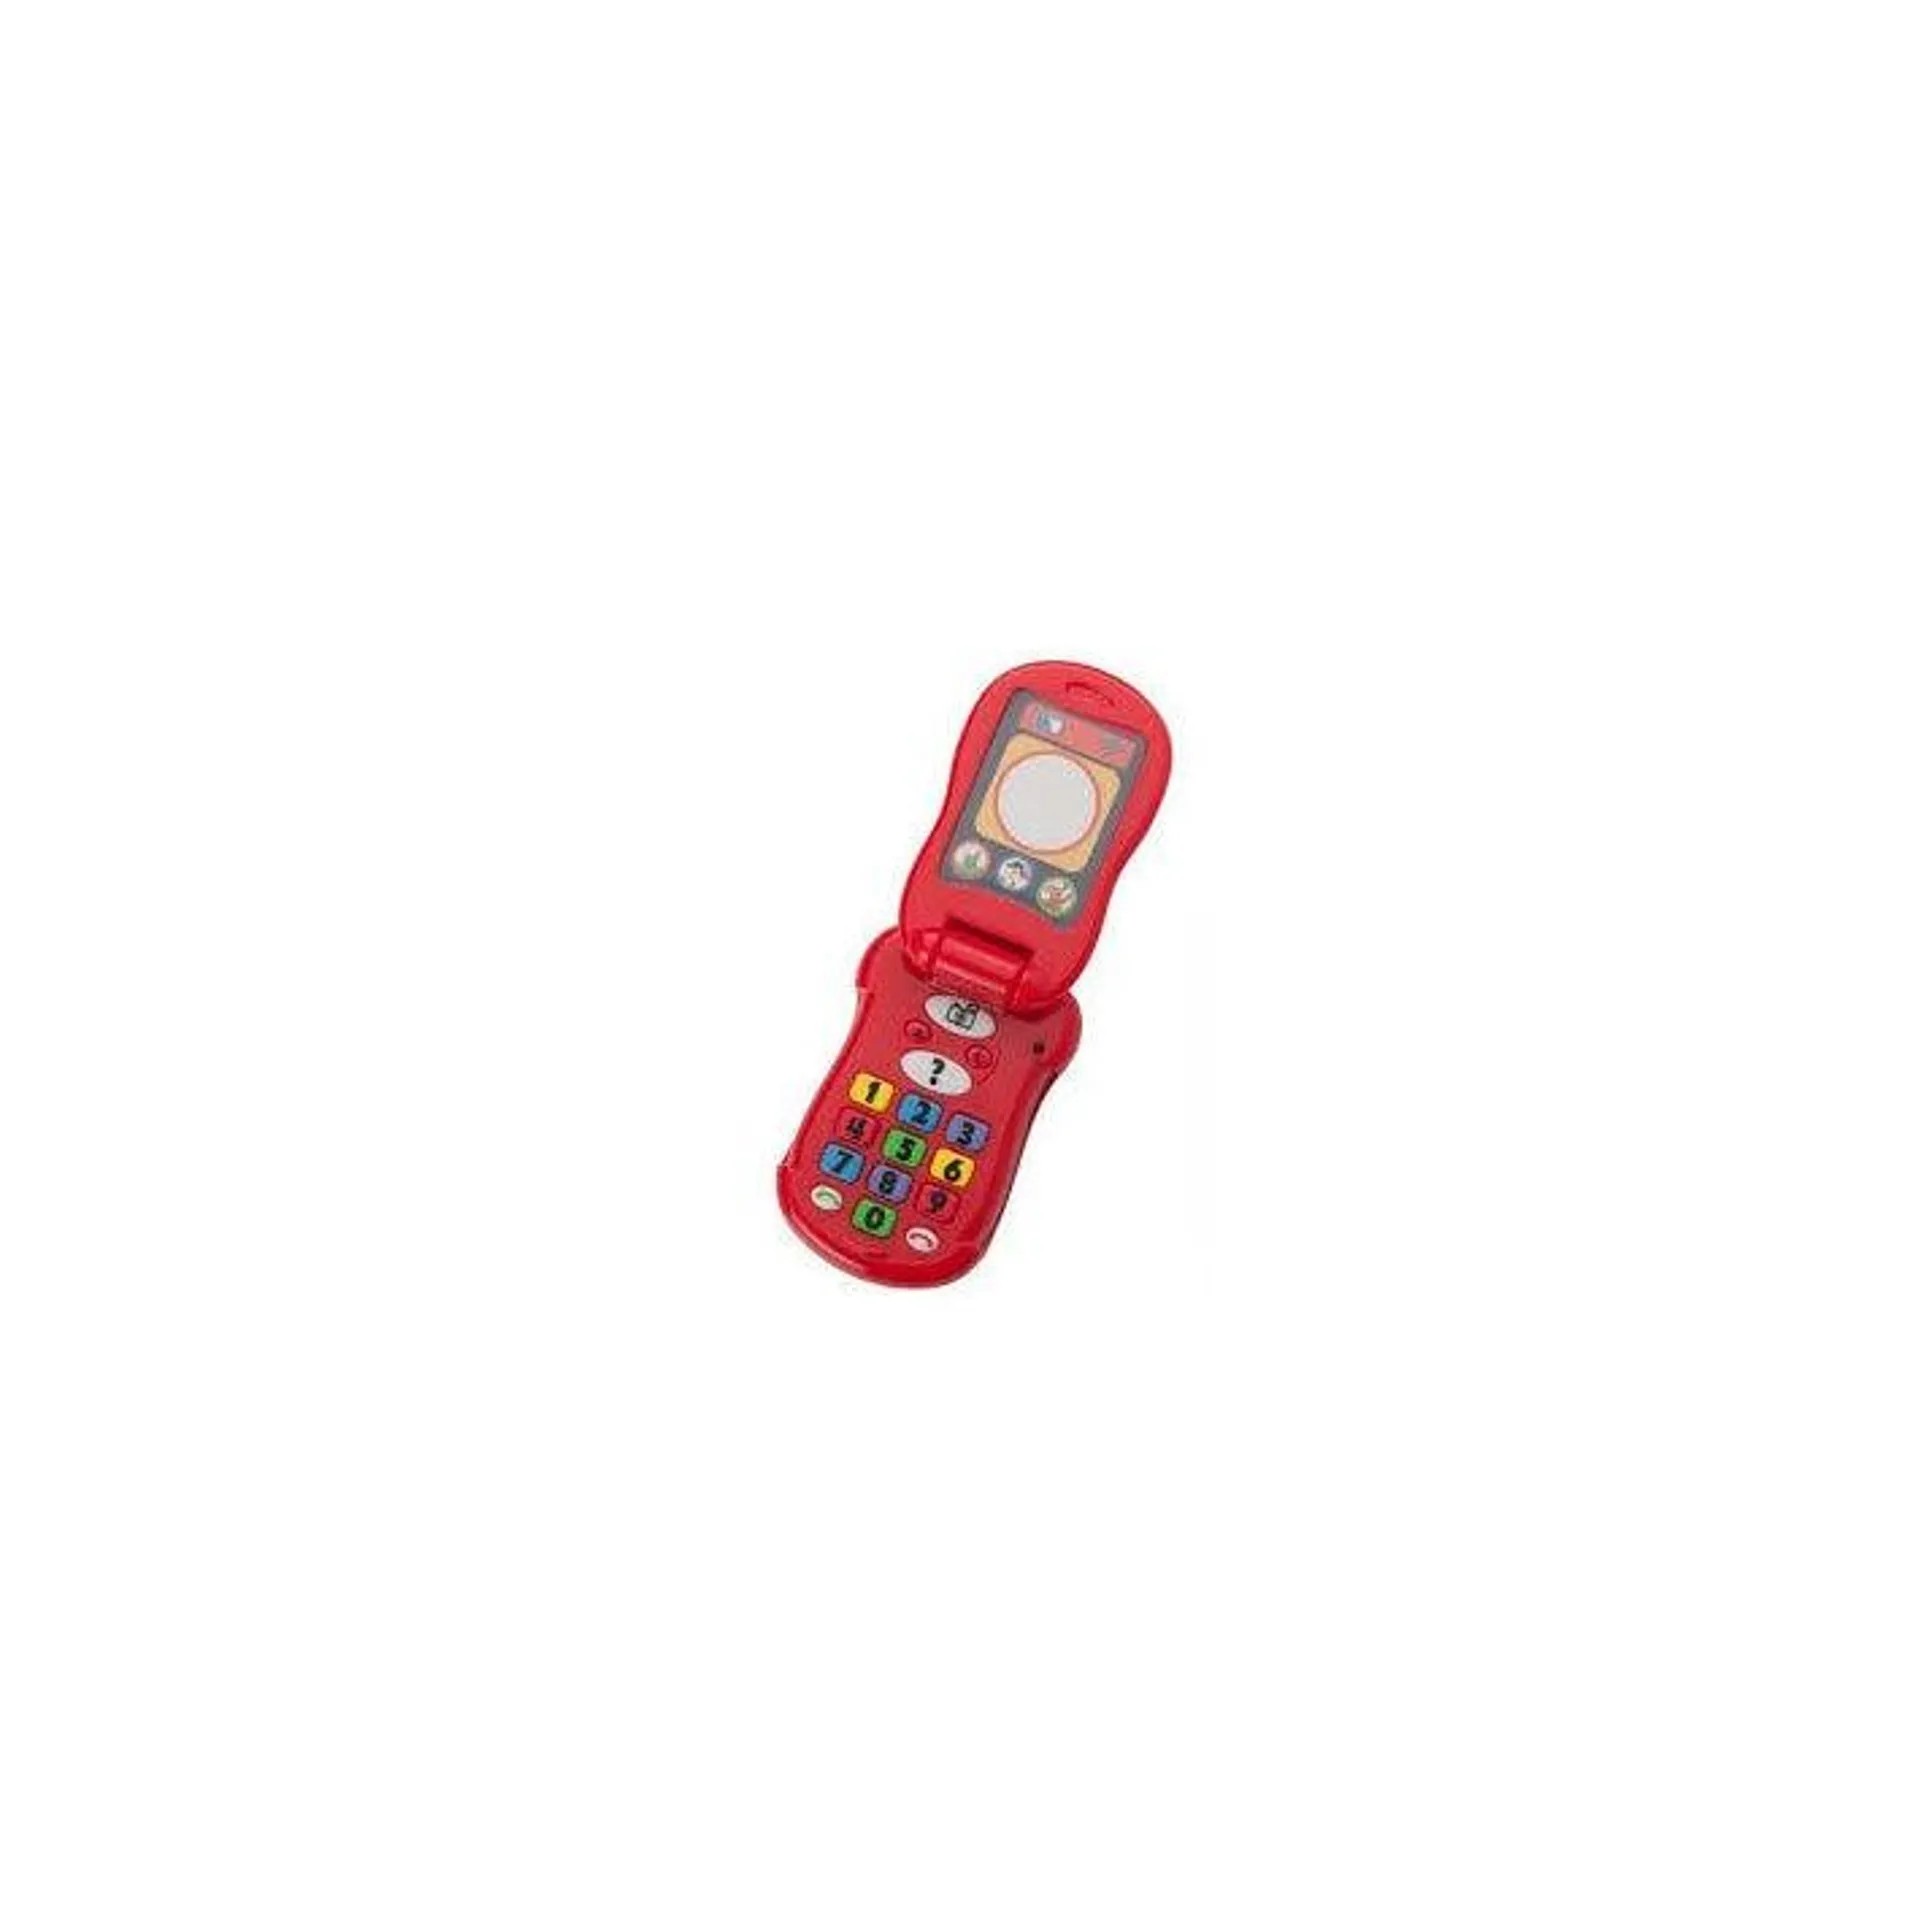 The Wiggles Flip And Learn Phone